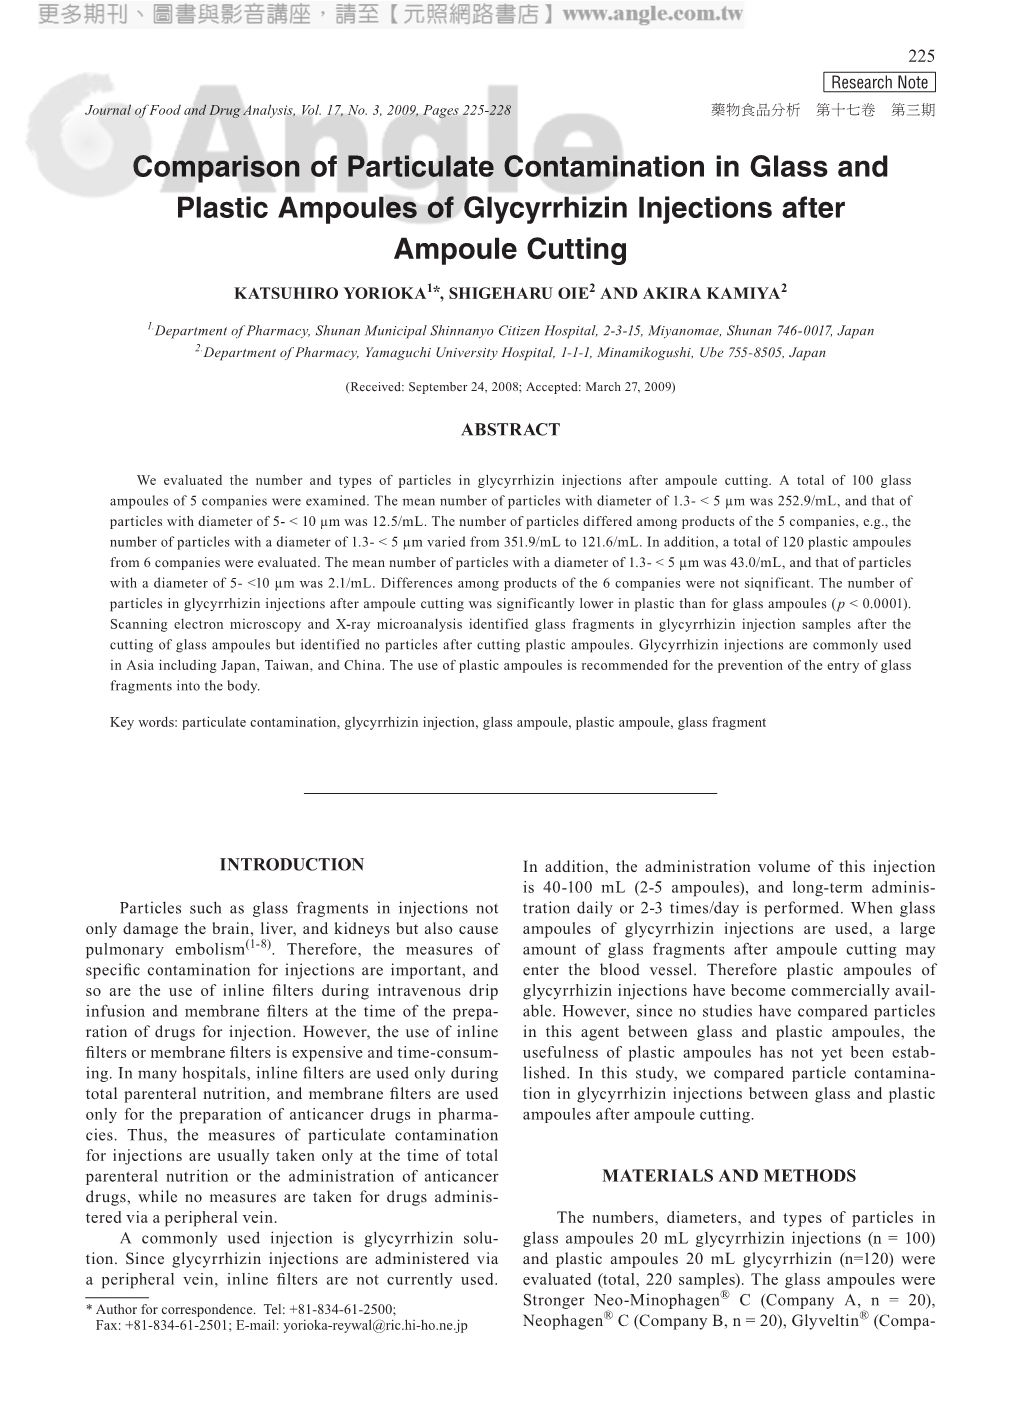 Comparison of Particulate Contamination in Glass and Plastic Ampoules of Glycyrrhizin Injections After Ampoule Cutting